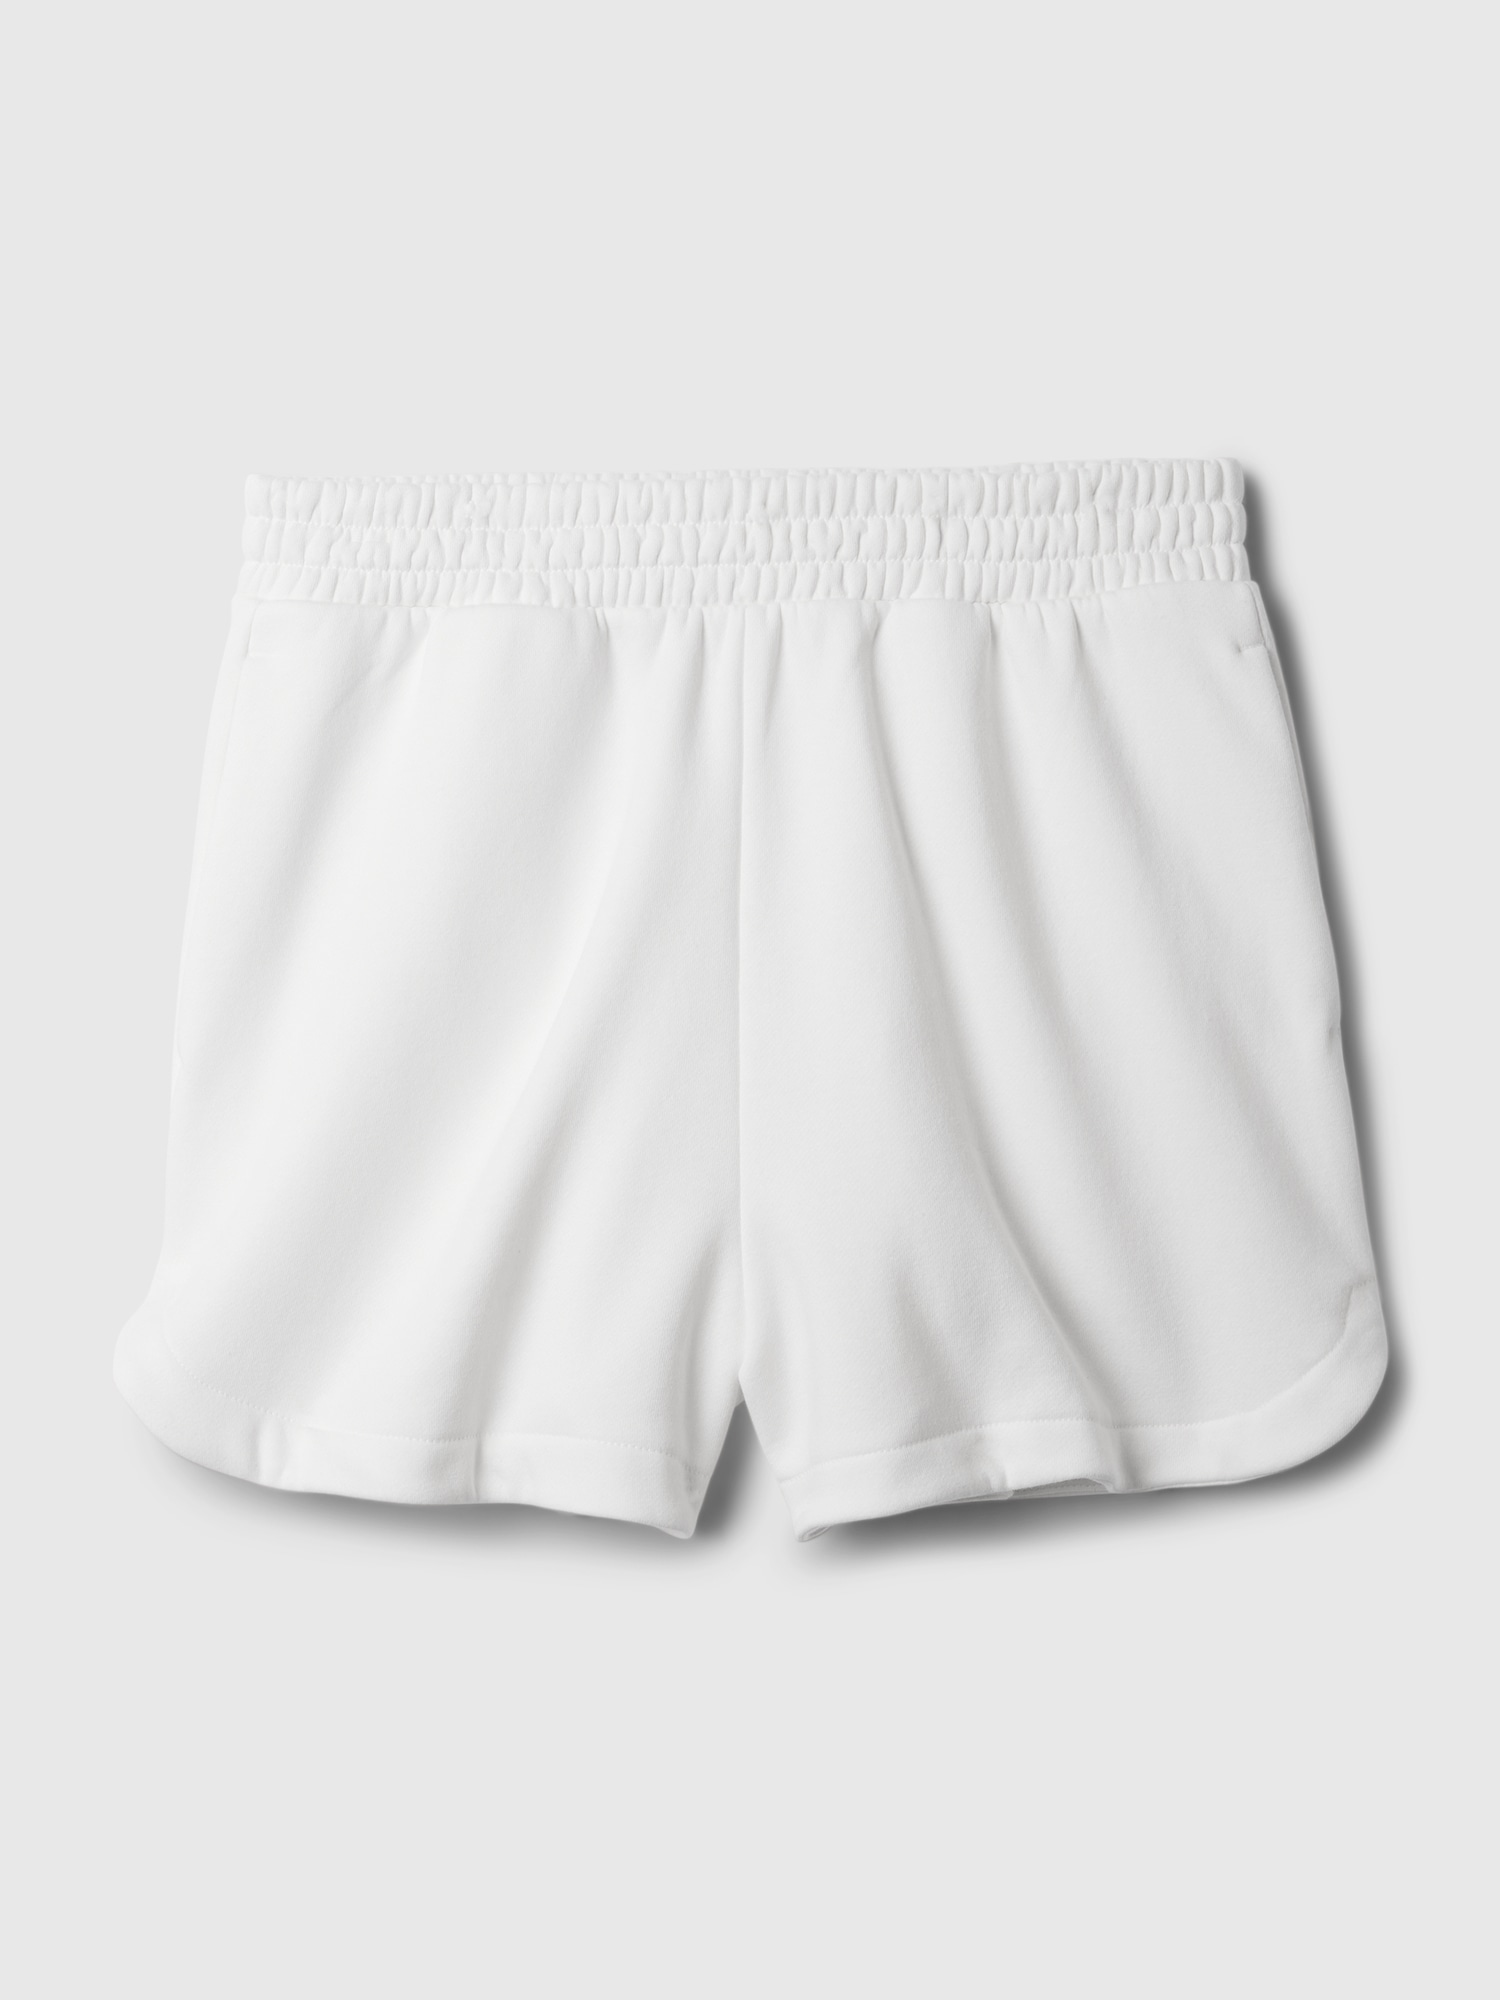 Dolphin Shorts Collection